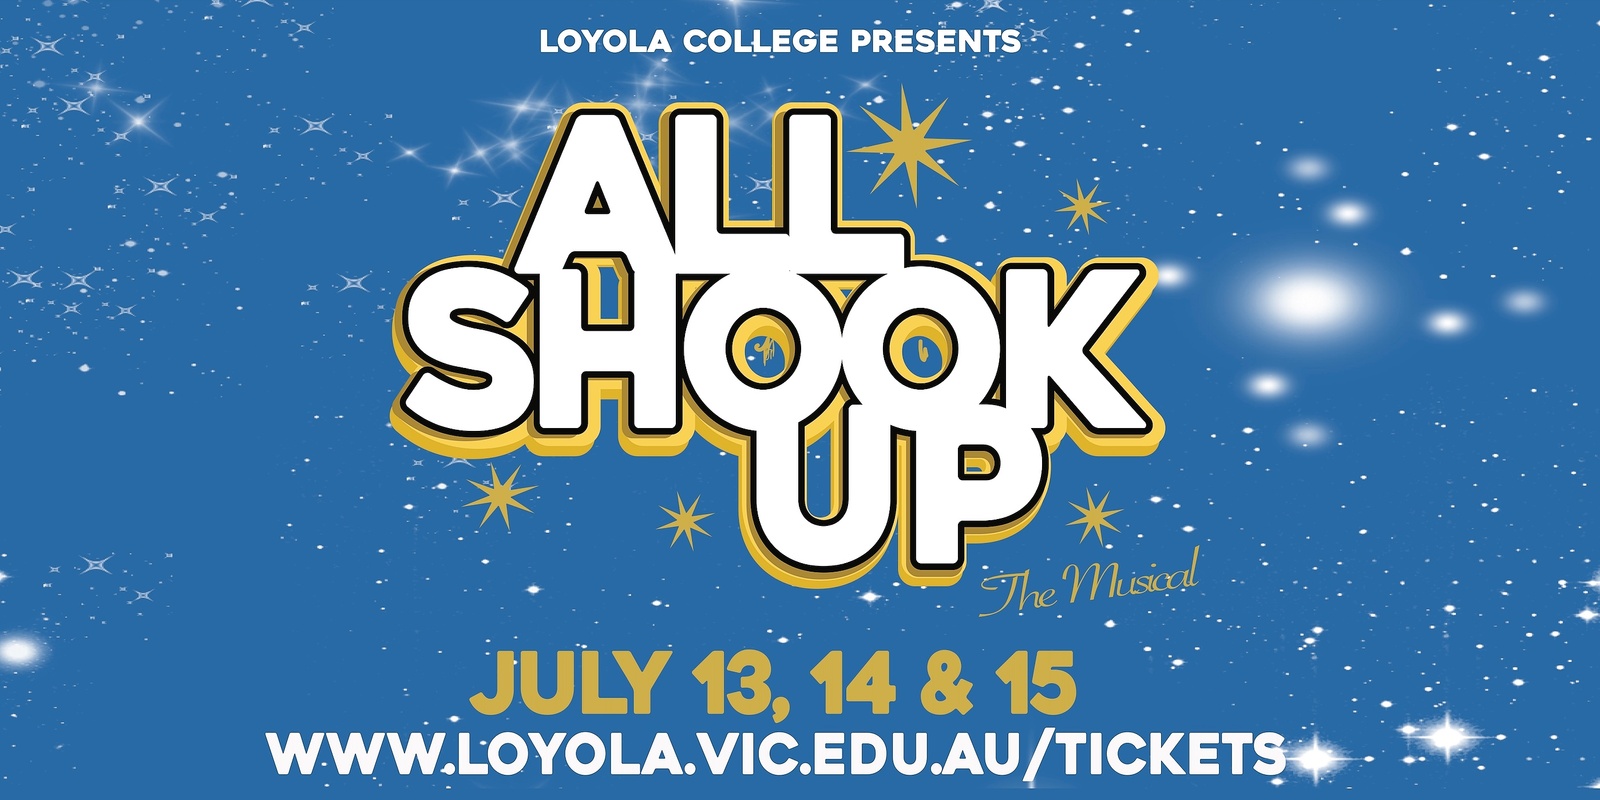 Banner image for Loyola College Presents All Shook Up: The Musical 